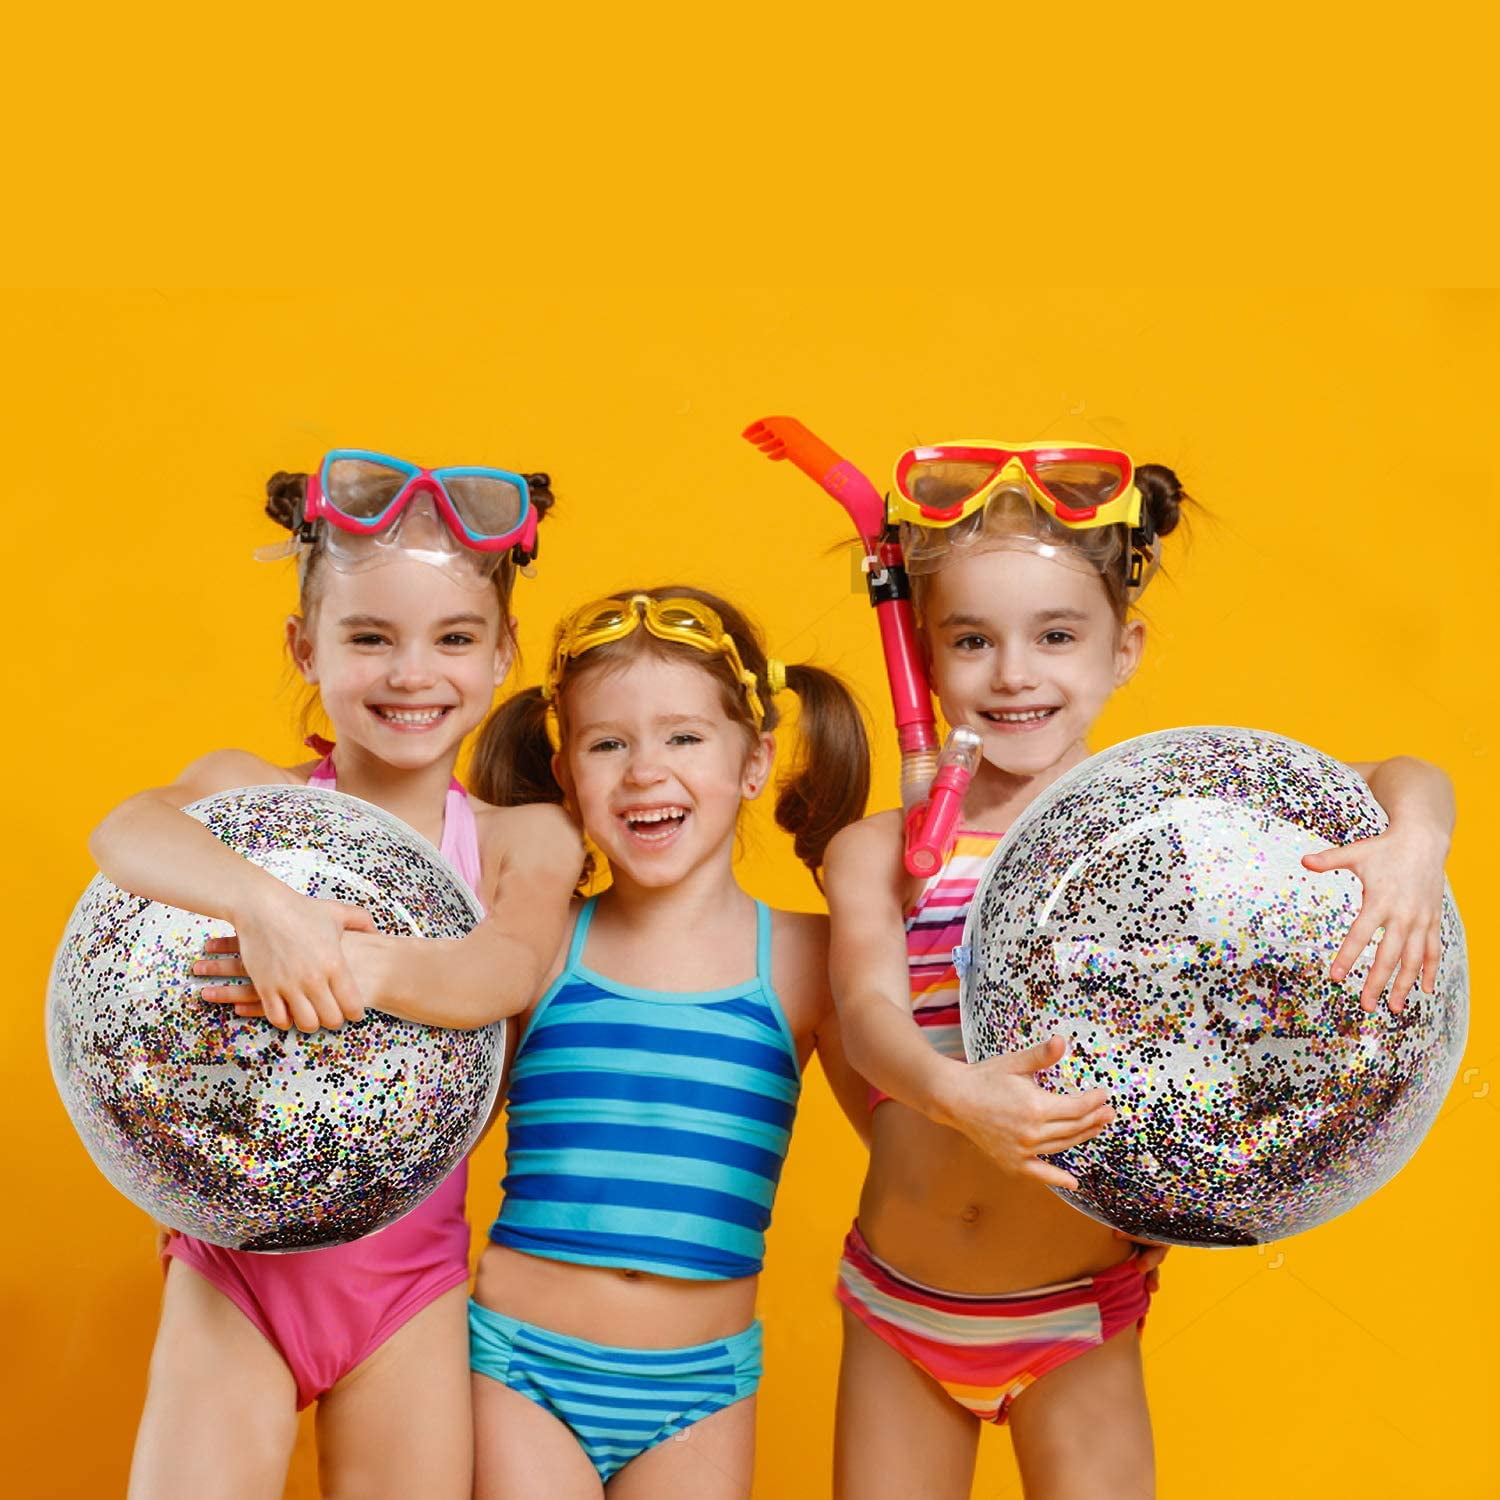 4 Pieces Inflatable Glitter Beach Ball 16 Inch Swimming Pool Balls Confetti Glitter Beach Ball Water Beach Toys for Adult Teens Summer Party Birthday Pool Party Favors 